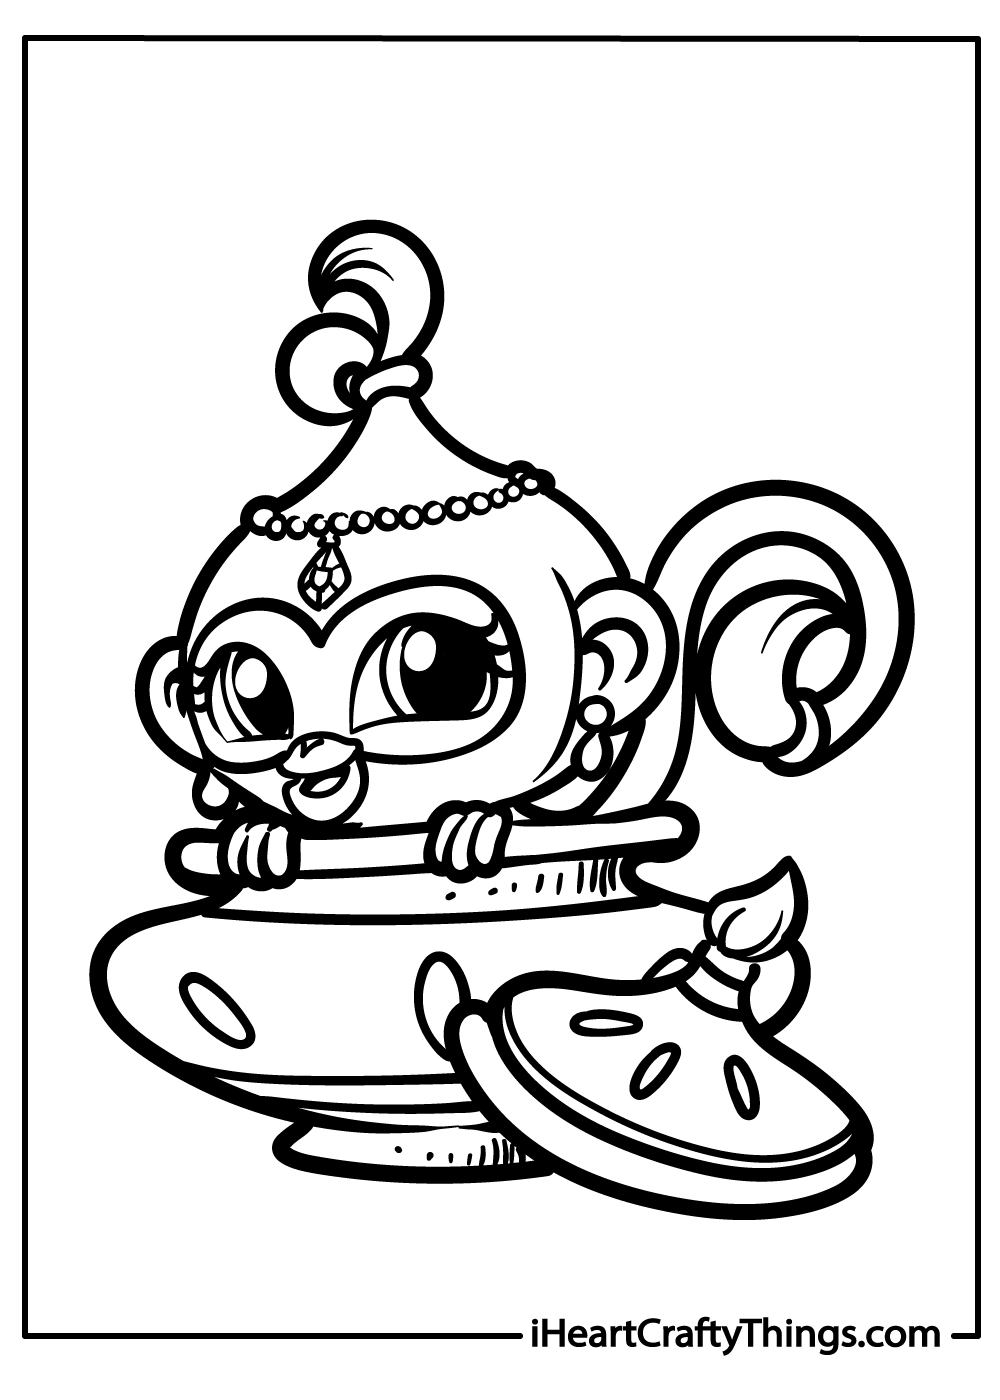 shimmer and shine coloring sheet free download